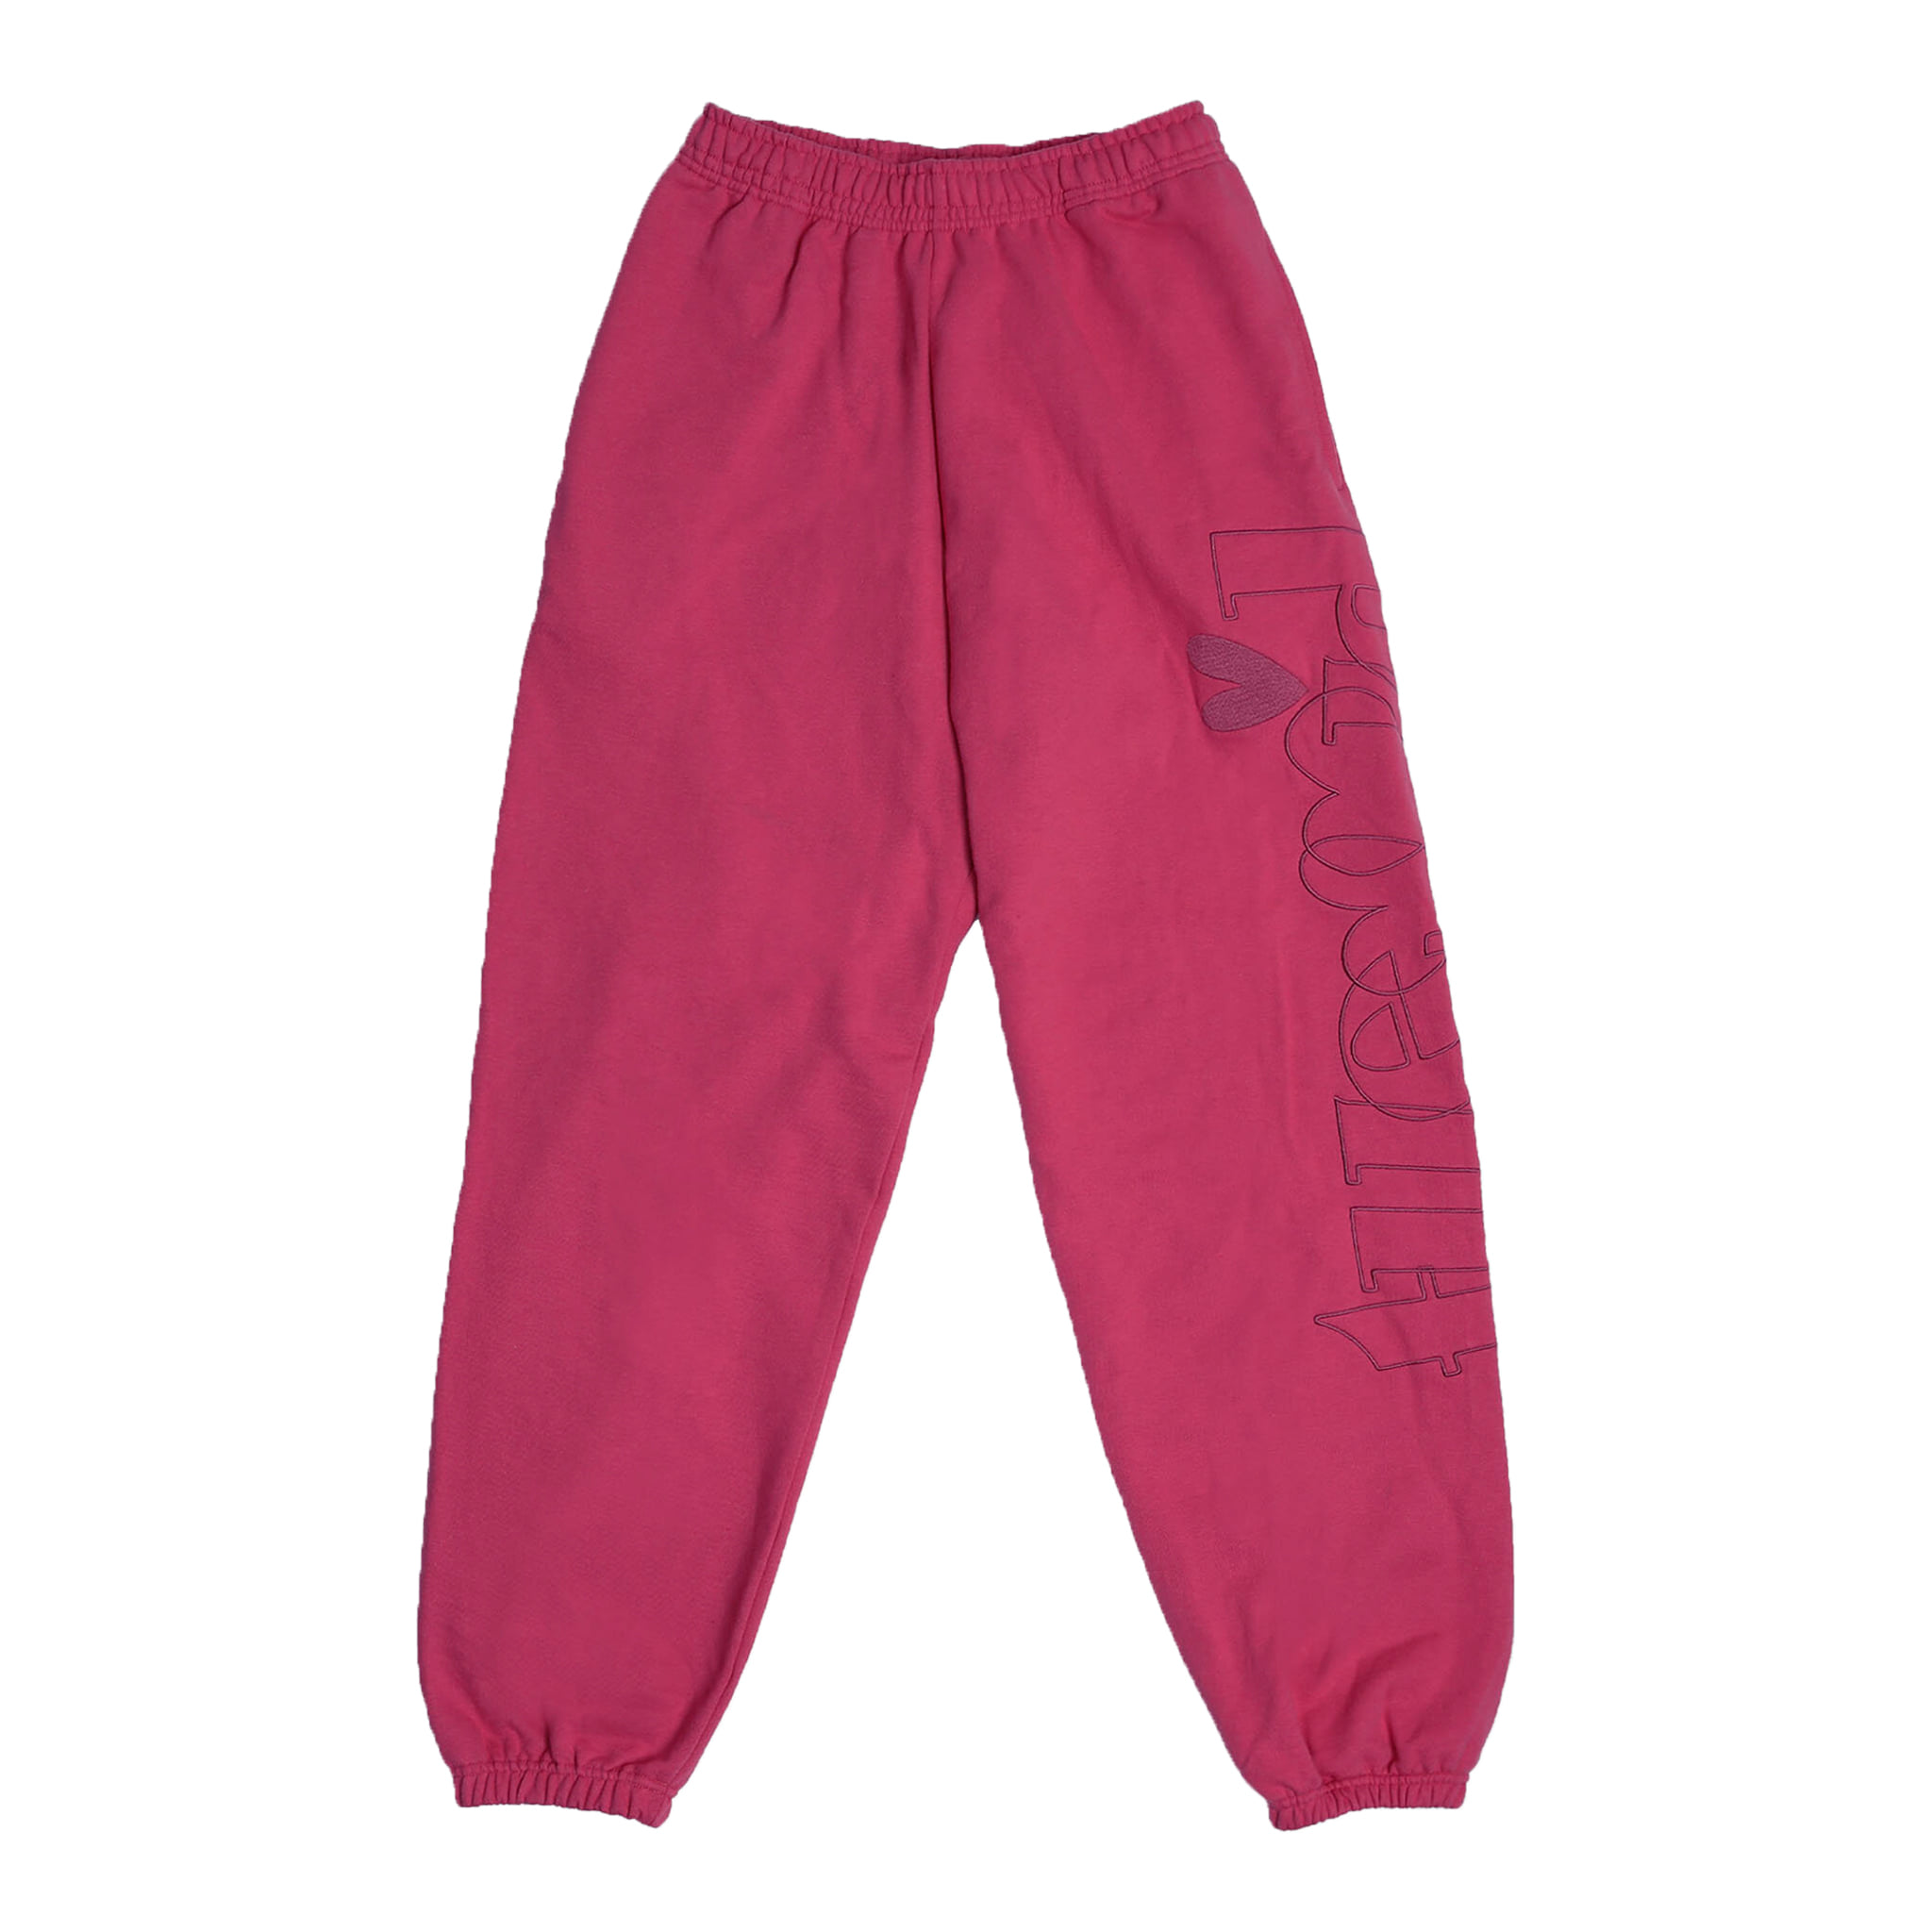 Tuewid classic sweatpants in standard fit Ripe plums colour